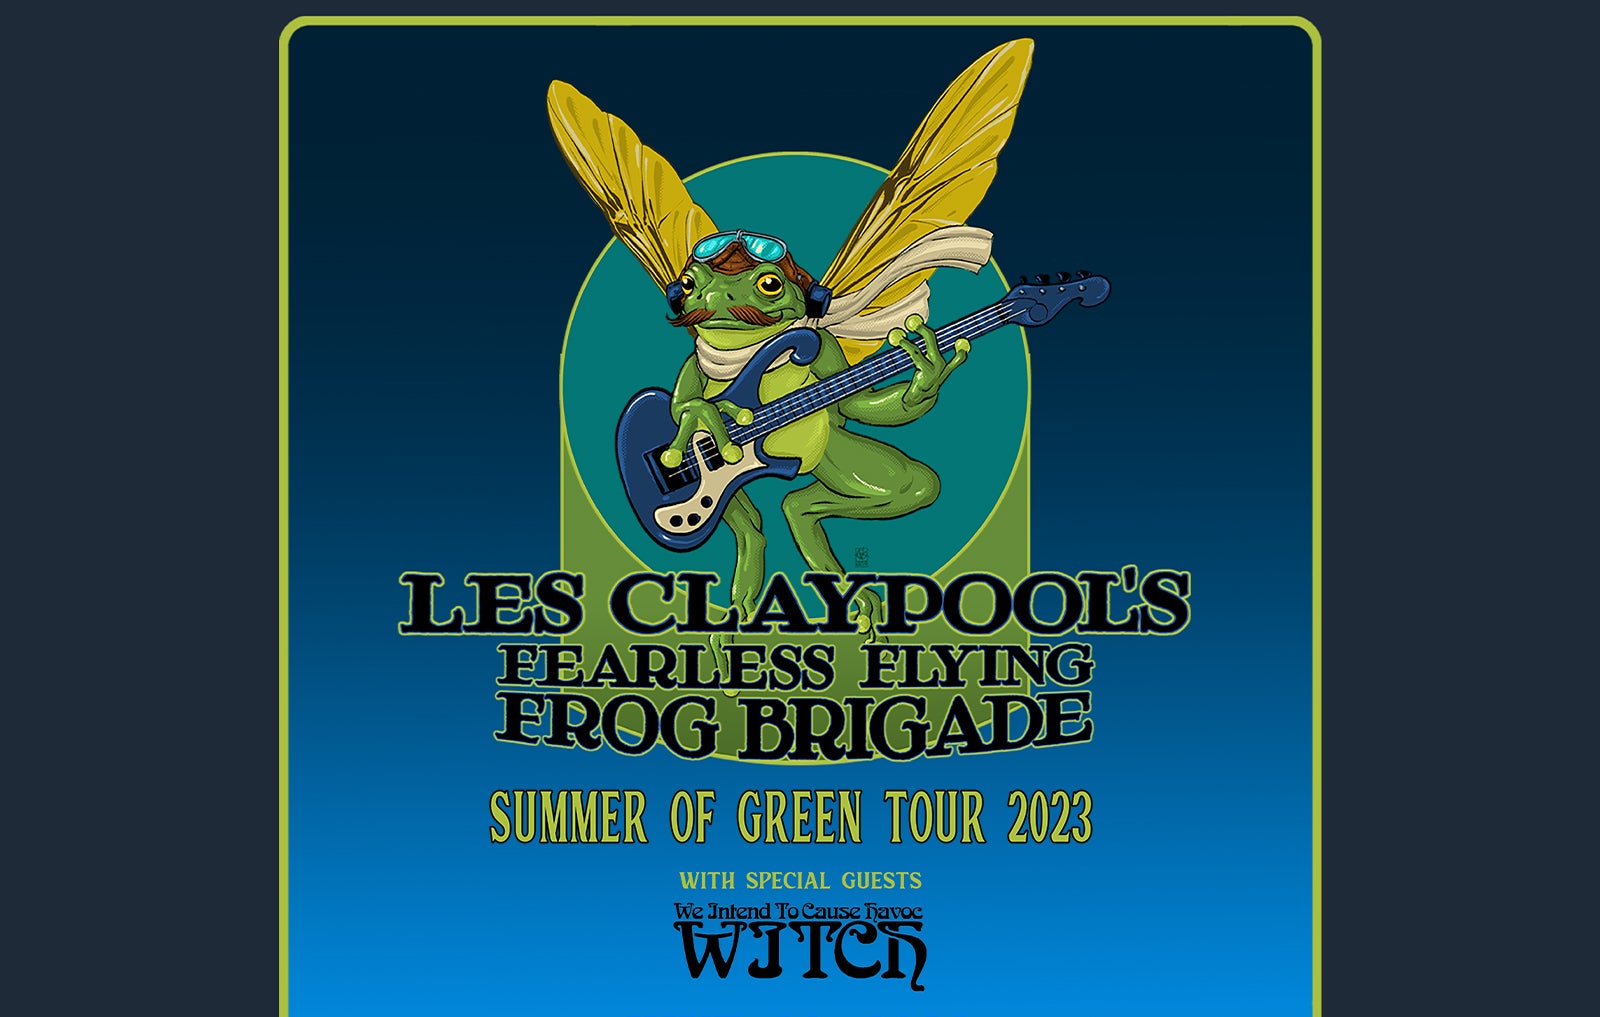 Les Claypool's Fearless Flying Frog Brigade: Summer of Green Tour 2023